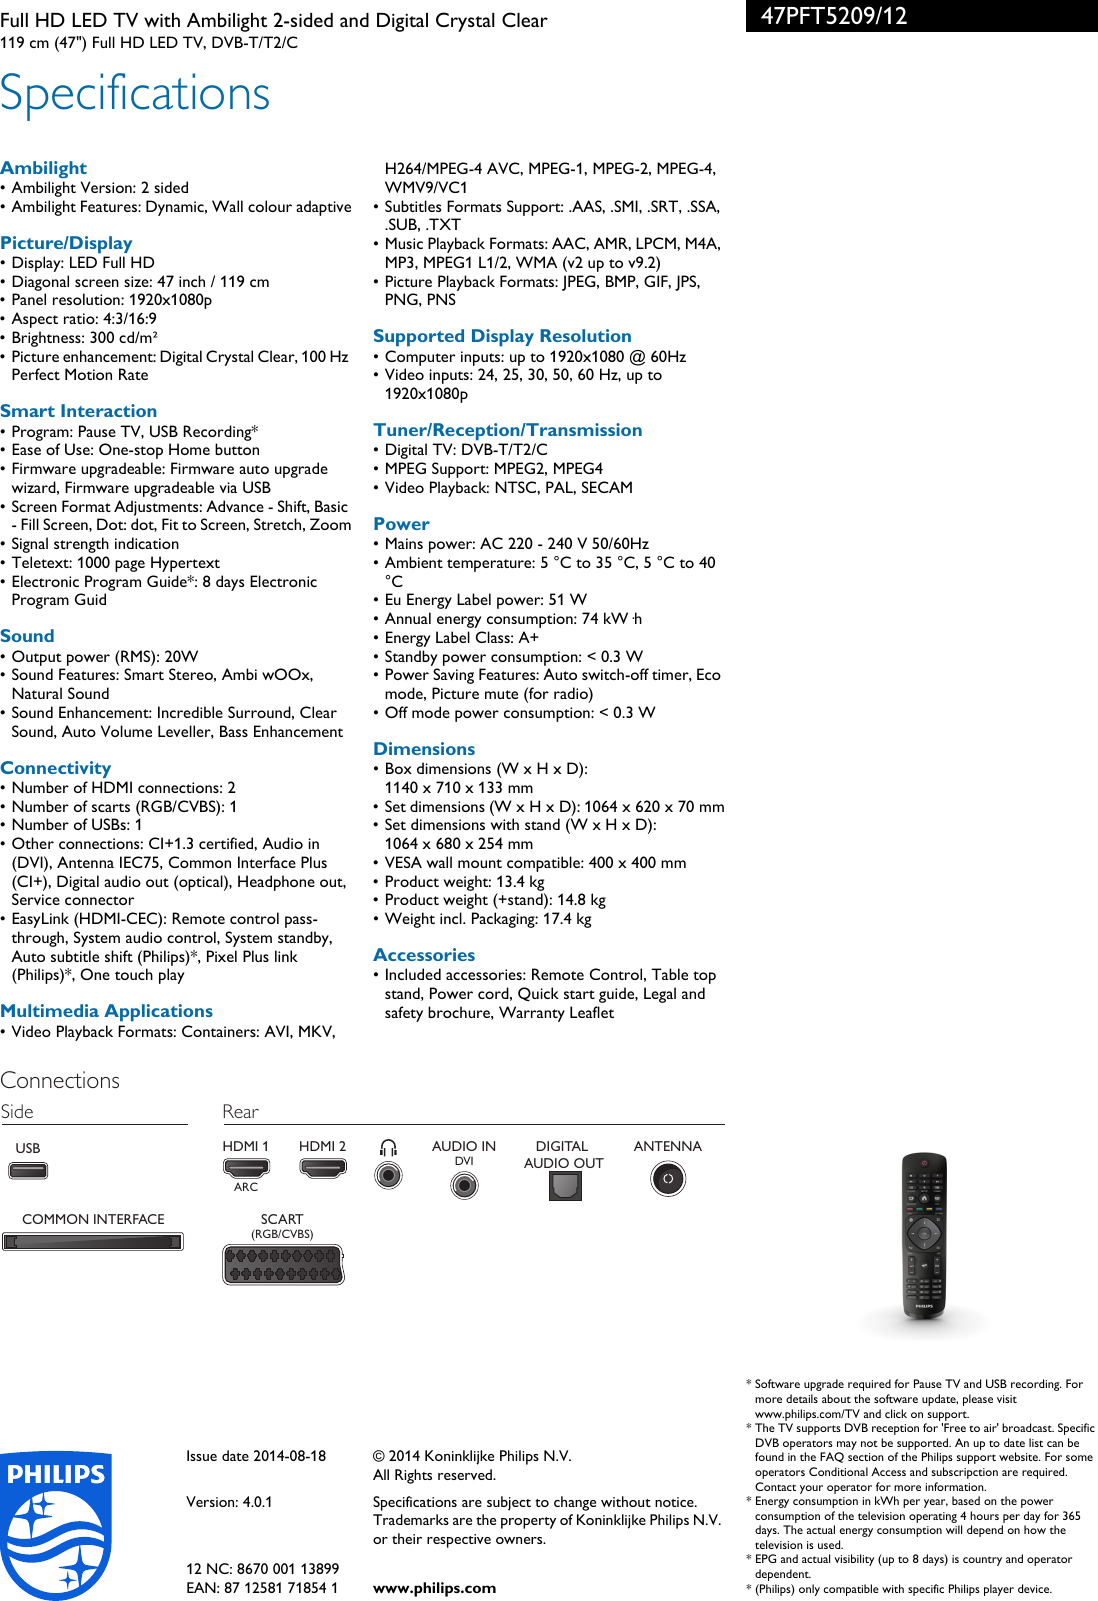 Page 3 of 3 - Philips 47PFT5209/12 Full HD LED TV With Ambilight 2-sided And Digital Crystal Clear User Manual Leaflet 47pft5209 12 Pss